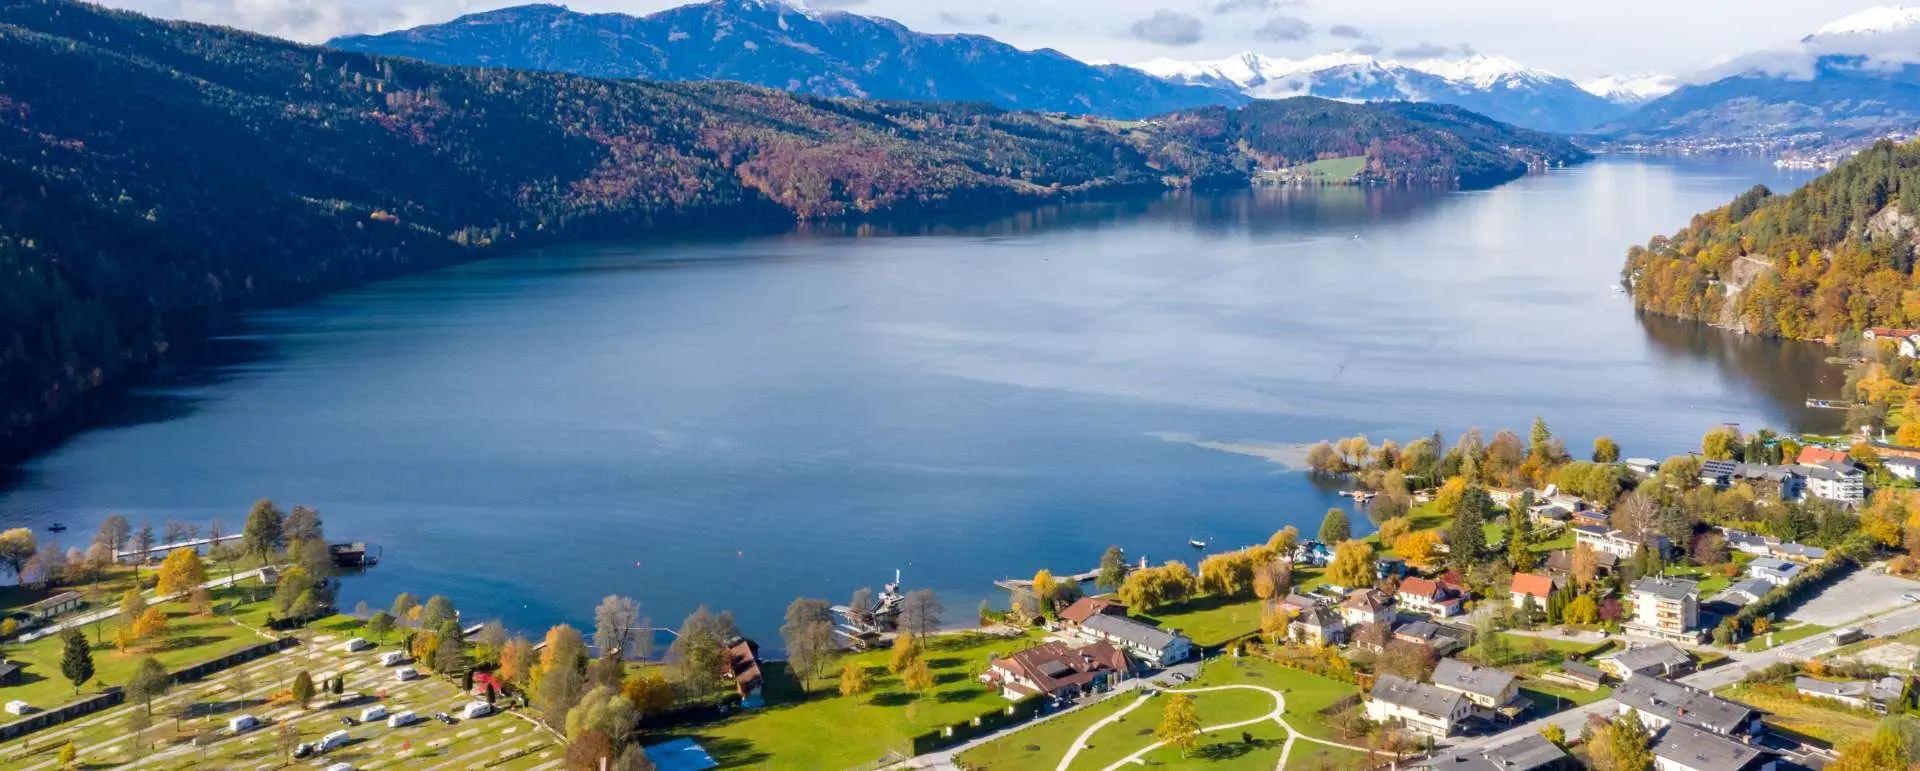 Millstätter See - the destination for group trips